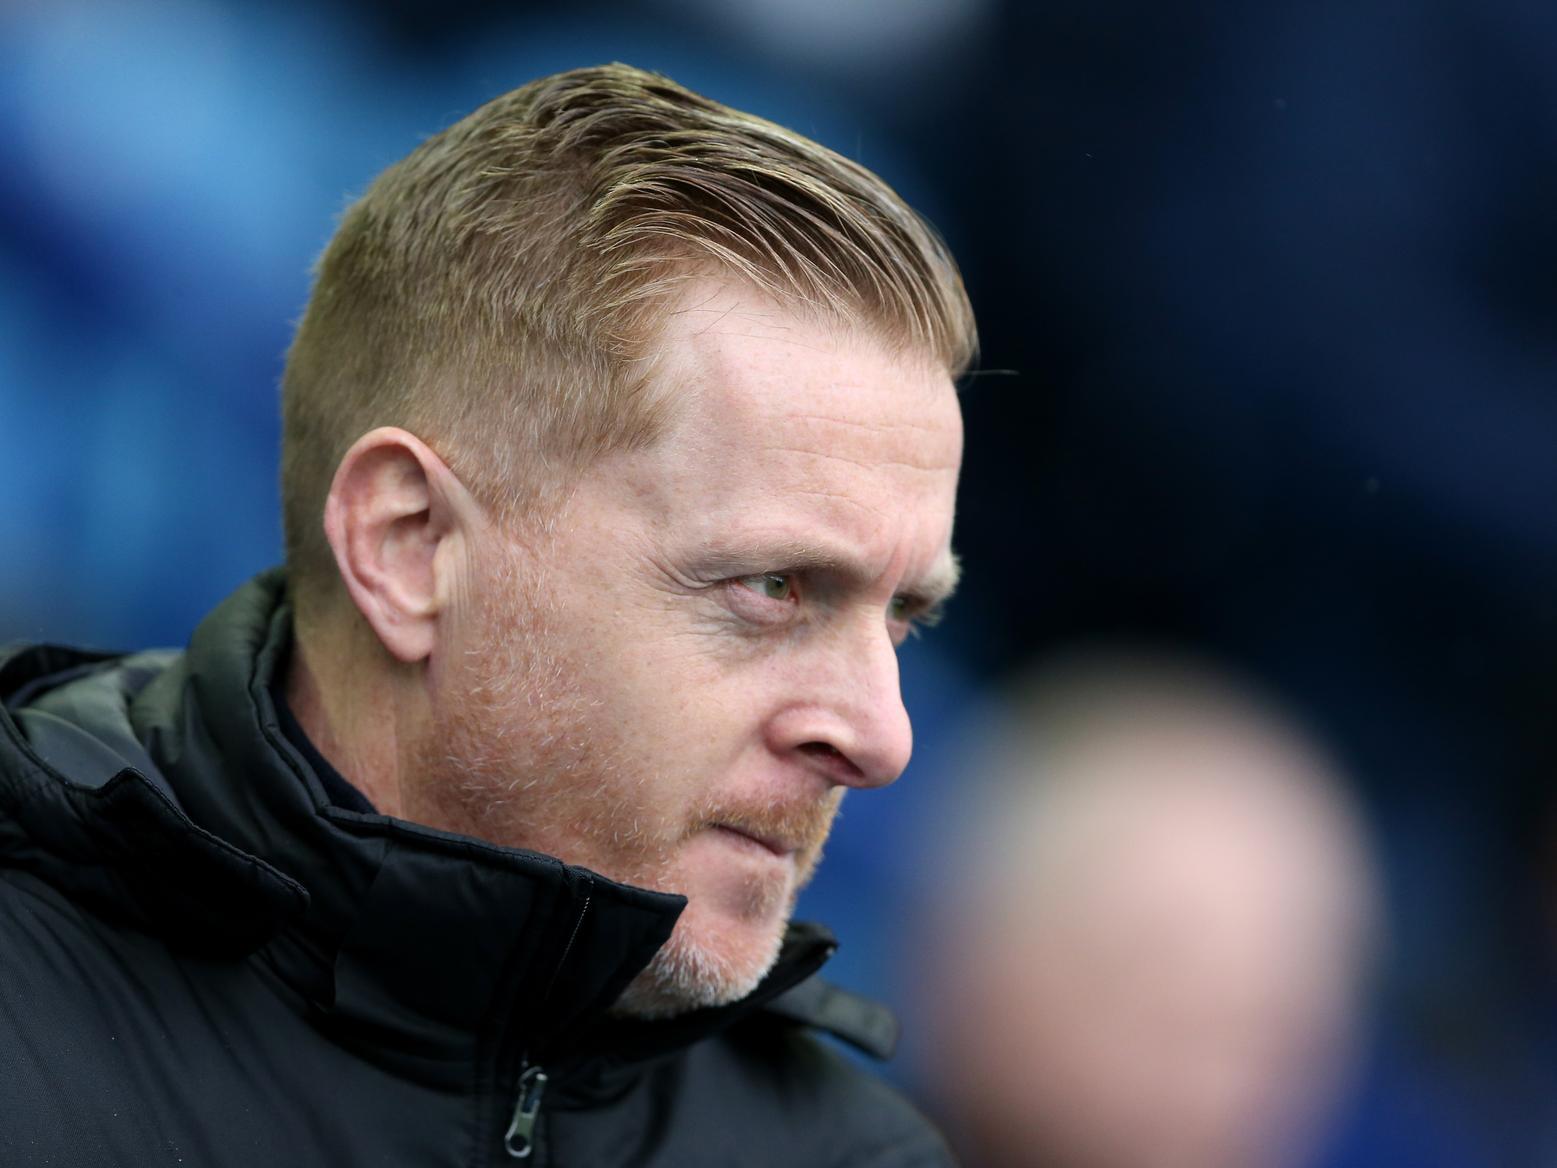 Sheffield Wednesday owner Dejphon Chansiri is said to have assured Garry Monk that he'll still be the club's manager next season, despite his side winning just two league games since Christmas. (The Sun)